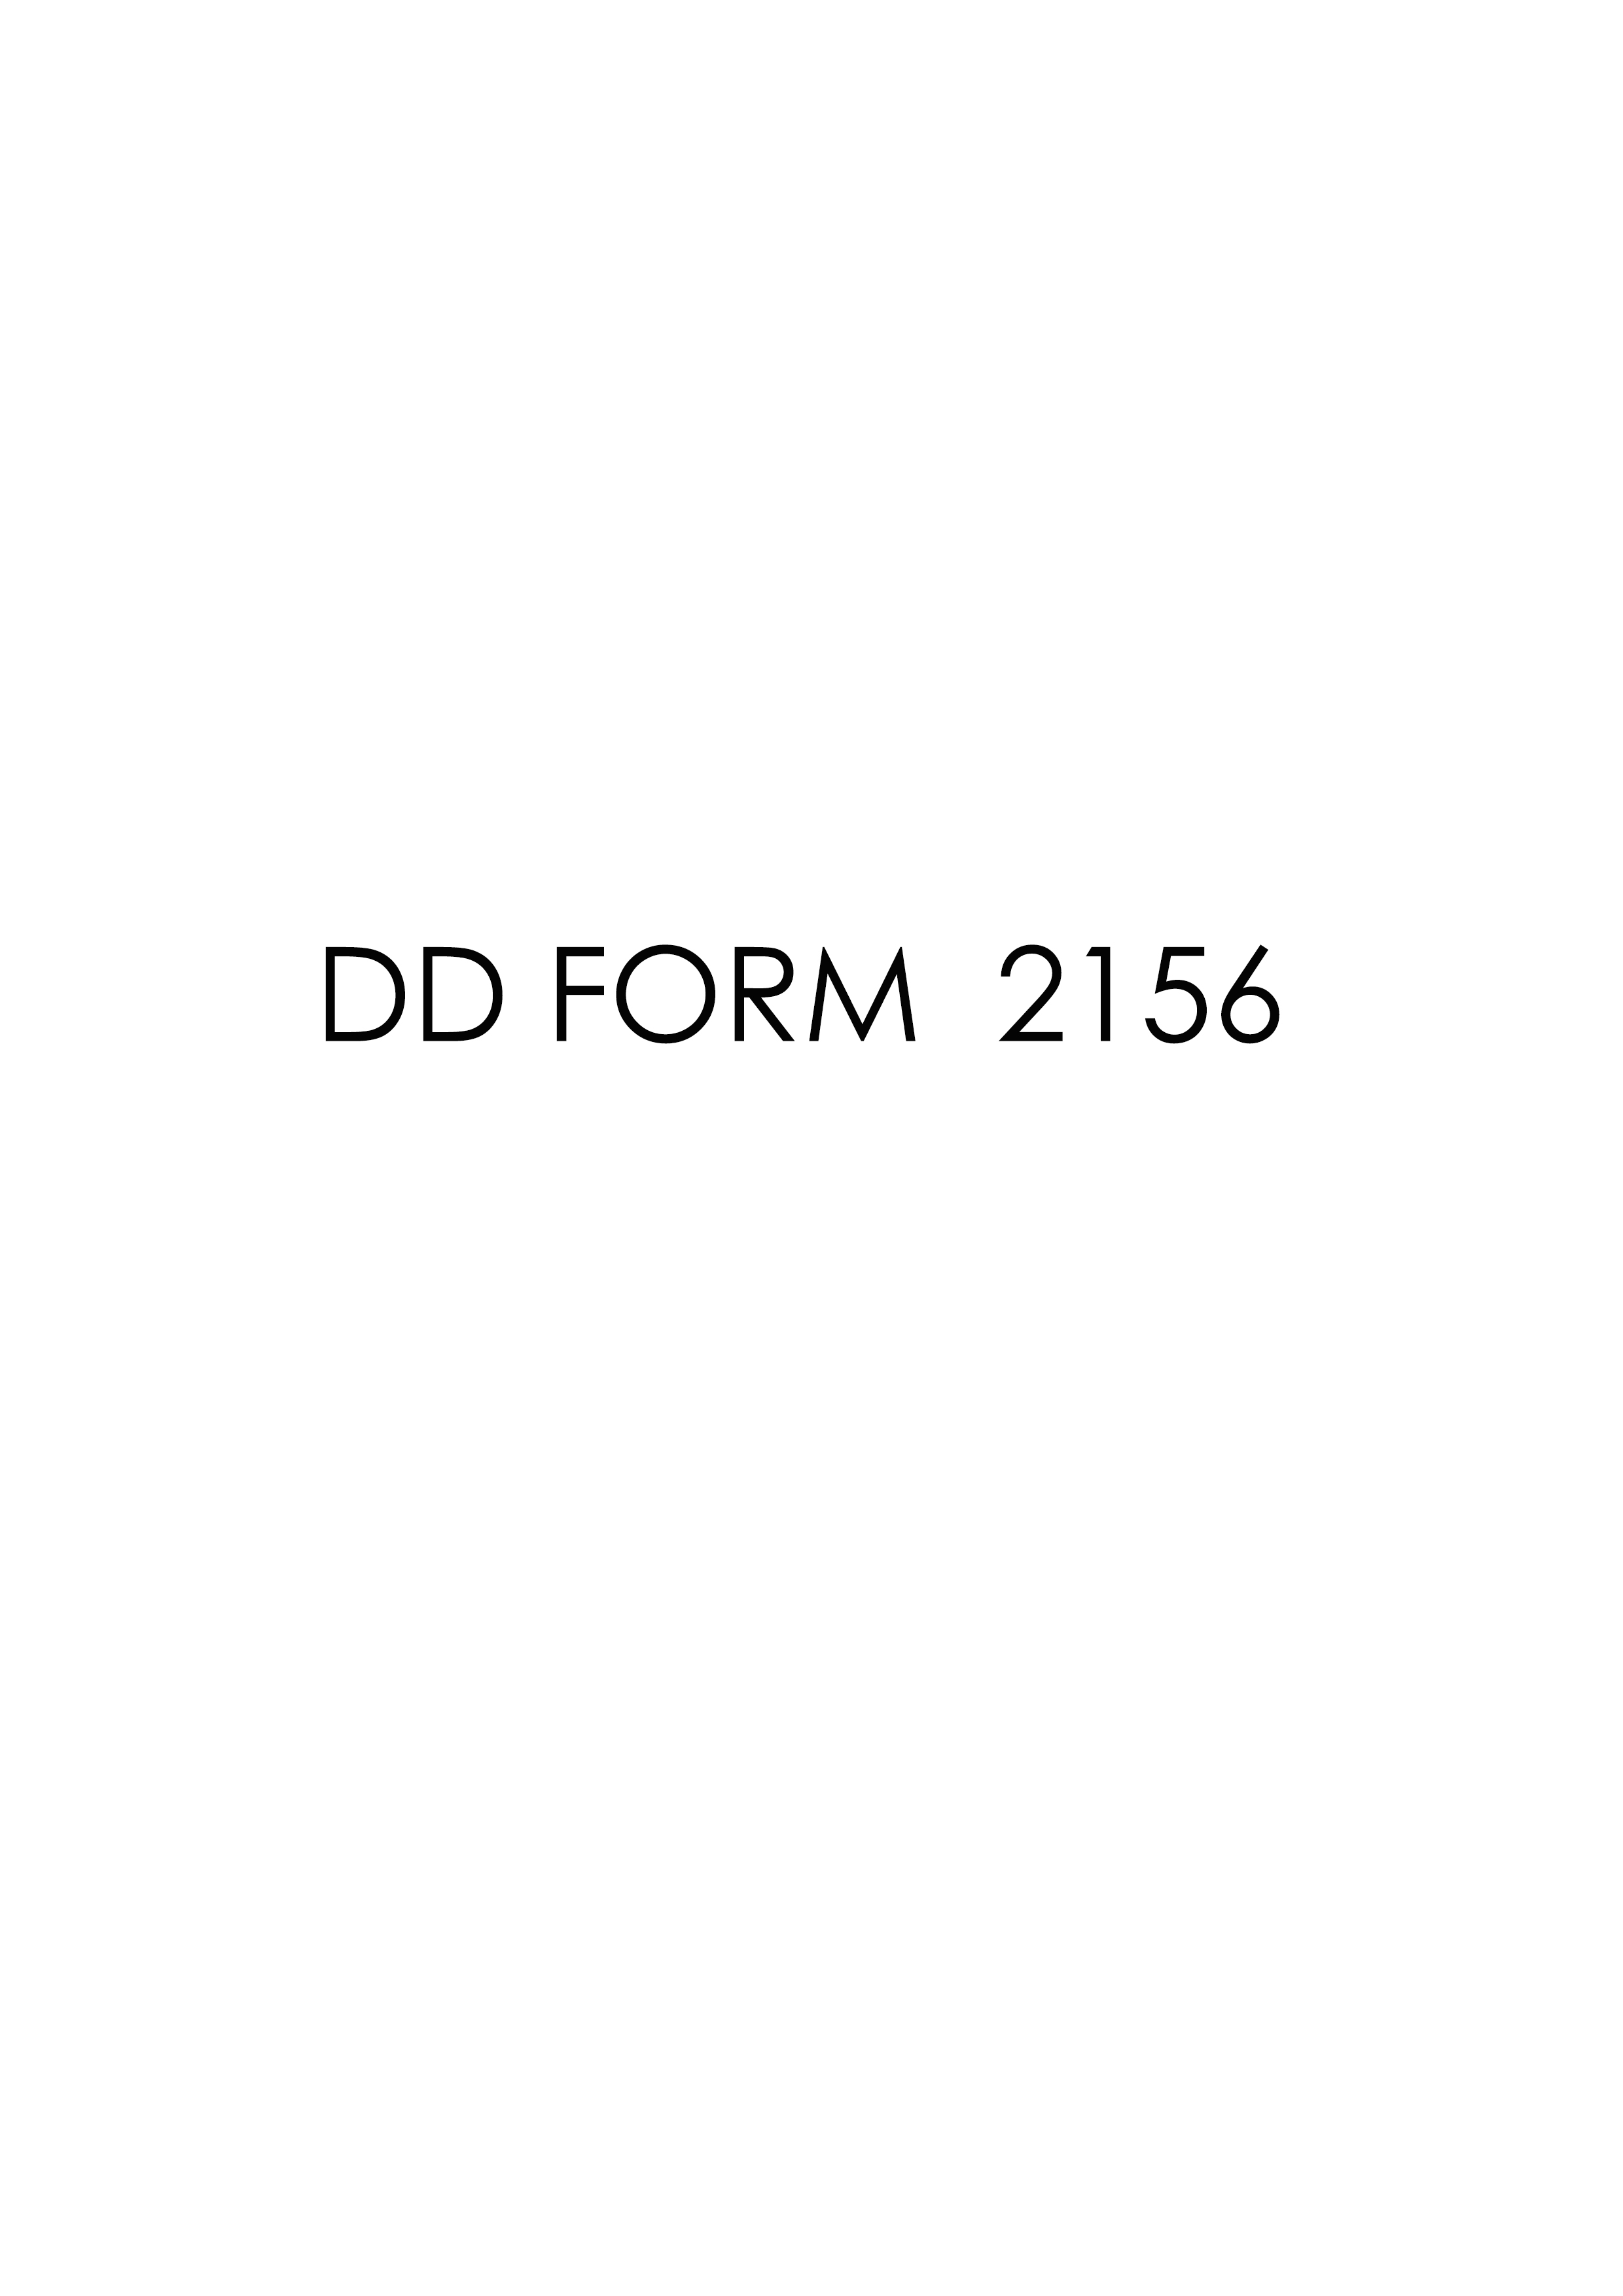 Download Fillable dd Form 2156